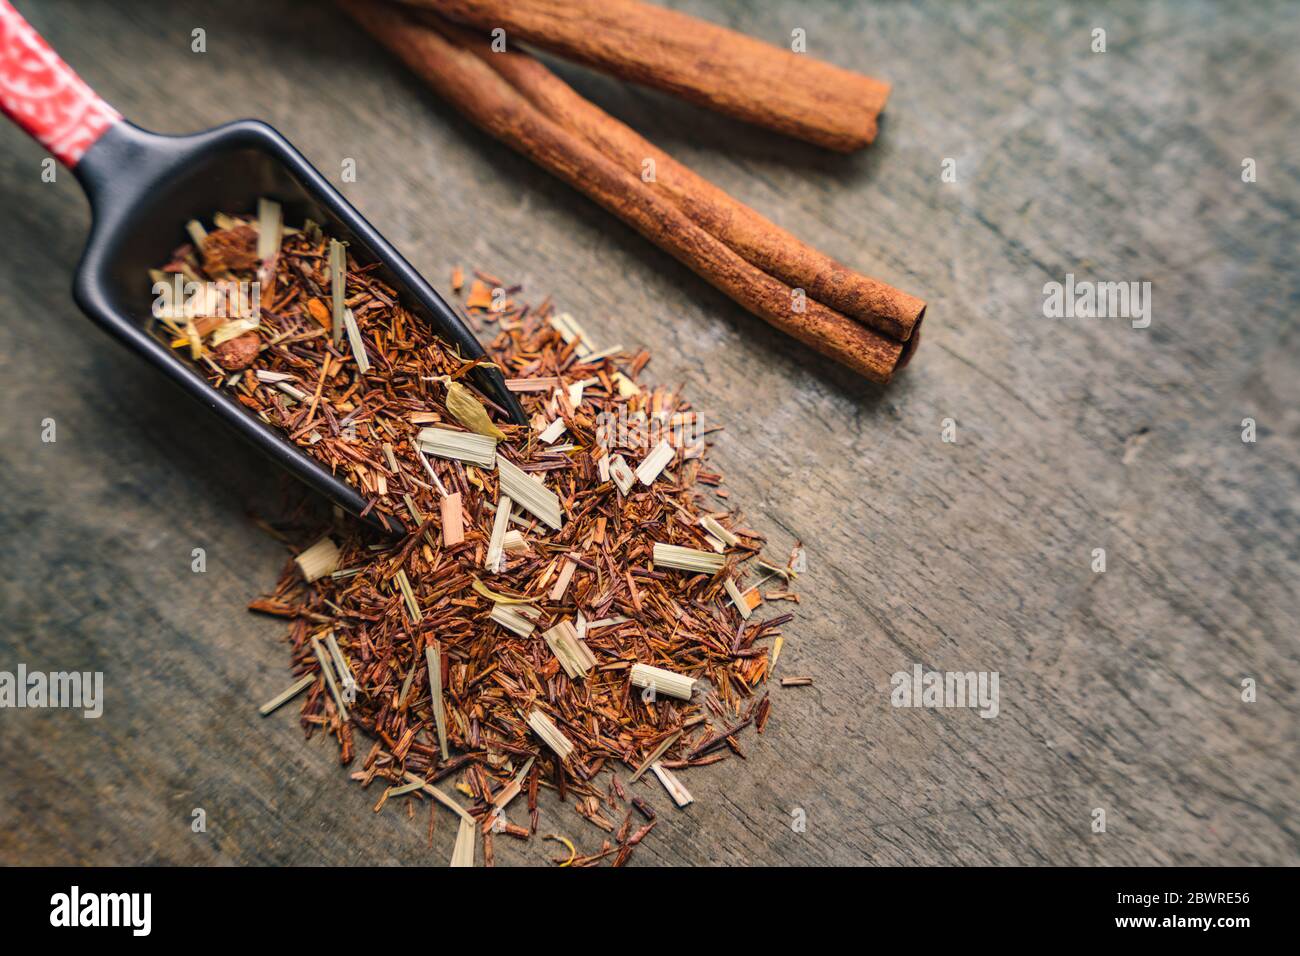 Japanese measuring tea spoon spreads aromatic rooibos dried leaves on wooden surface. Cinnamon bark strips on the side Stock Photo